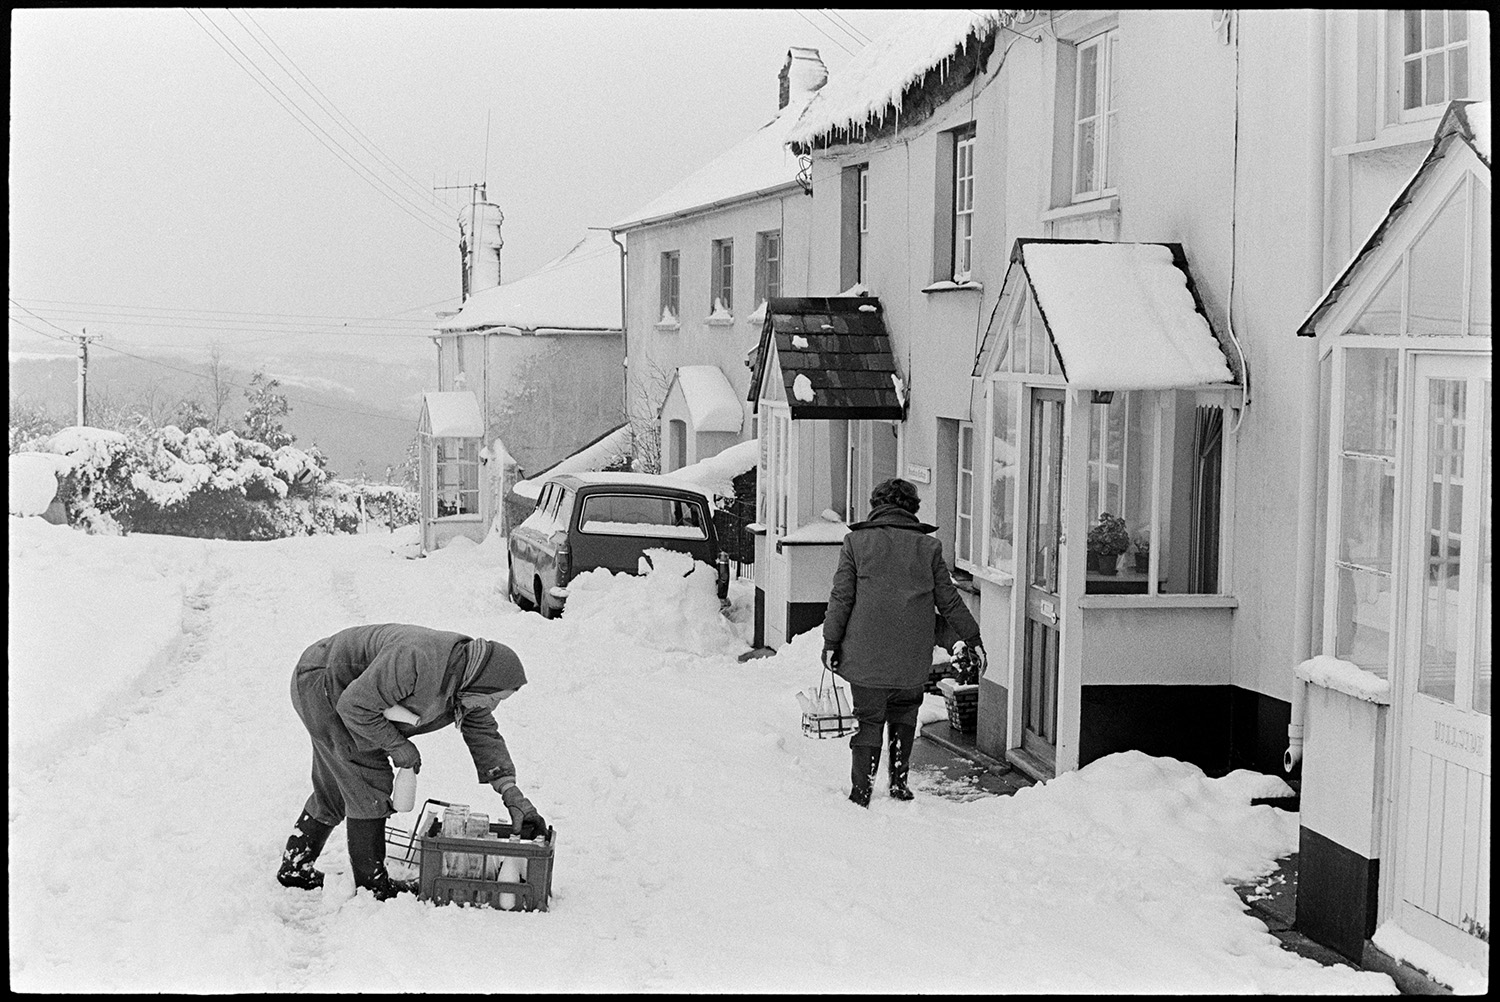 Snow, women delivering milk in village, dog. 
[Dorothy Hiscock and her daughter, Diane Hiscock, delivering milk to a house in West Lane, Dolton. The lane is covered with snow and the porch of one of the houses also has snow on its roof. Icicles are hanging from some of the roofs.]